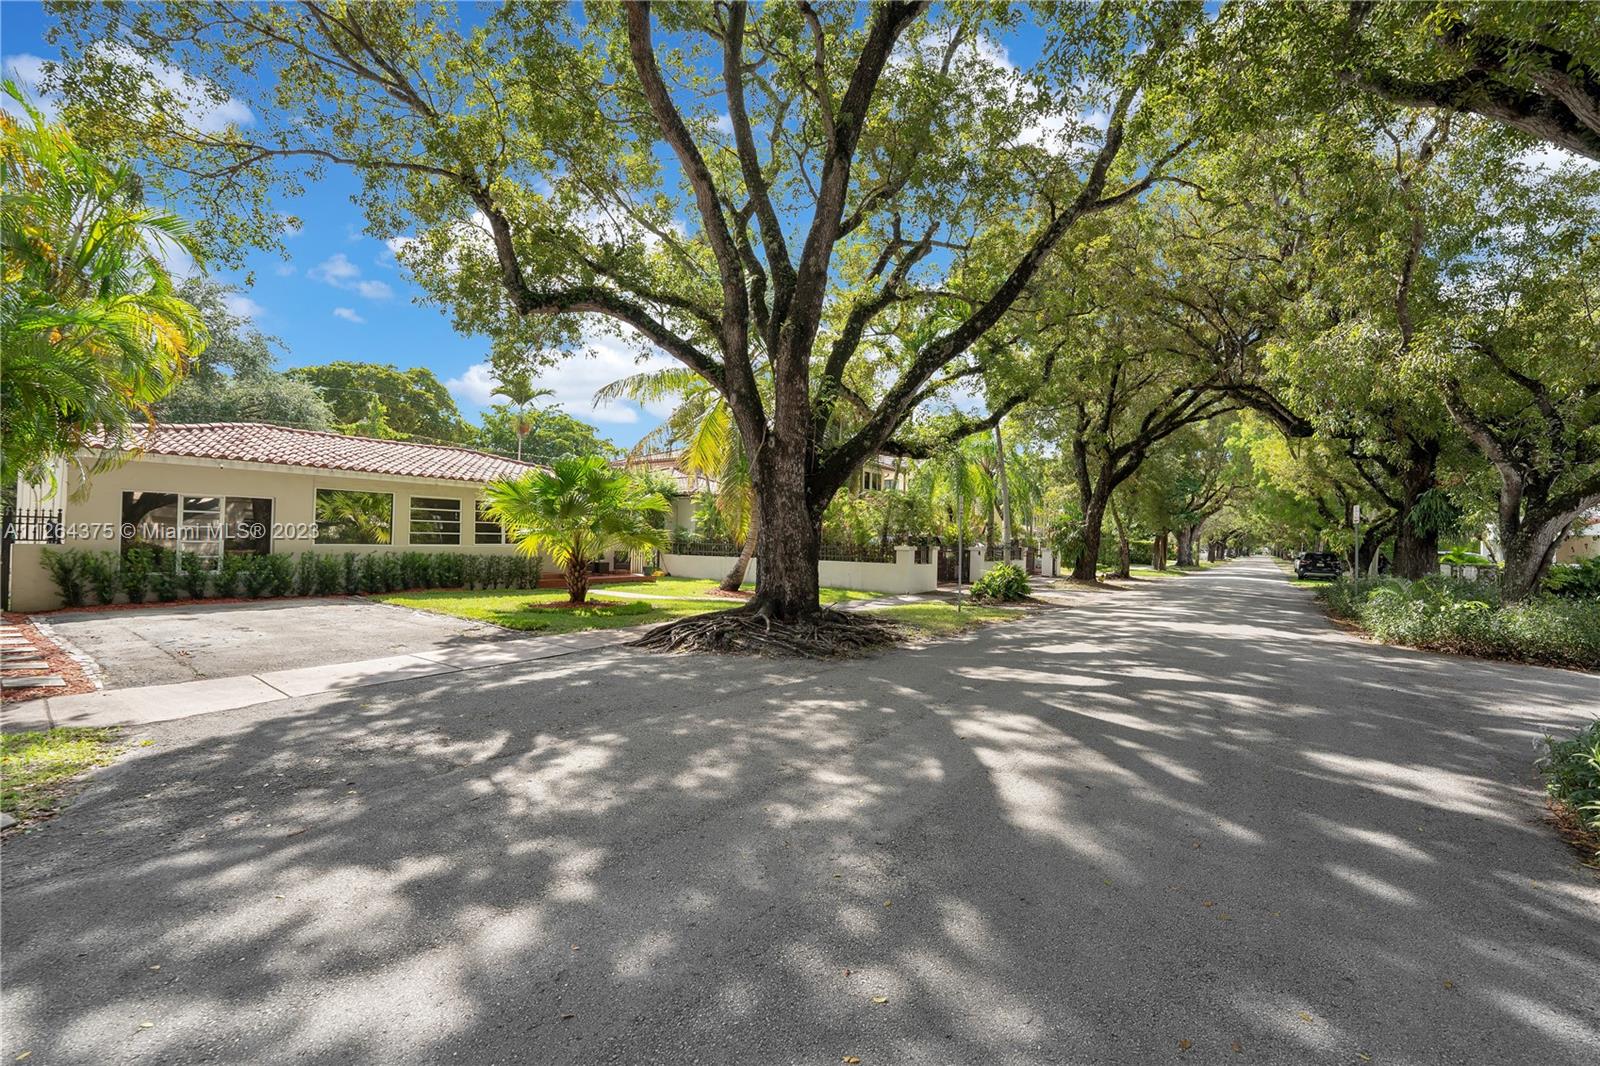 LOCATION! This Coral Gables home is located on a quiet, peaceful and beautiful tree-lined street, one block West of prestigious Granada Blvd. This single family residence home in Miami, features 3bed/2bath, with a 5,966 sq ft lot. Move in condition or transform into your dream home. Private fenced backyard, perfect for outdoor entertaining with plenty of room for a pool. Minutes away from Downtown Coral Gables, Miracle Mile, Biltmore and Granada golf courses, pet friendly areas, dog parks, tennis courts, upscale shops, cafes, entertainment and fine dining. Tesla charger included.